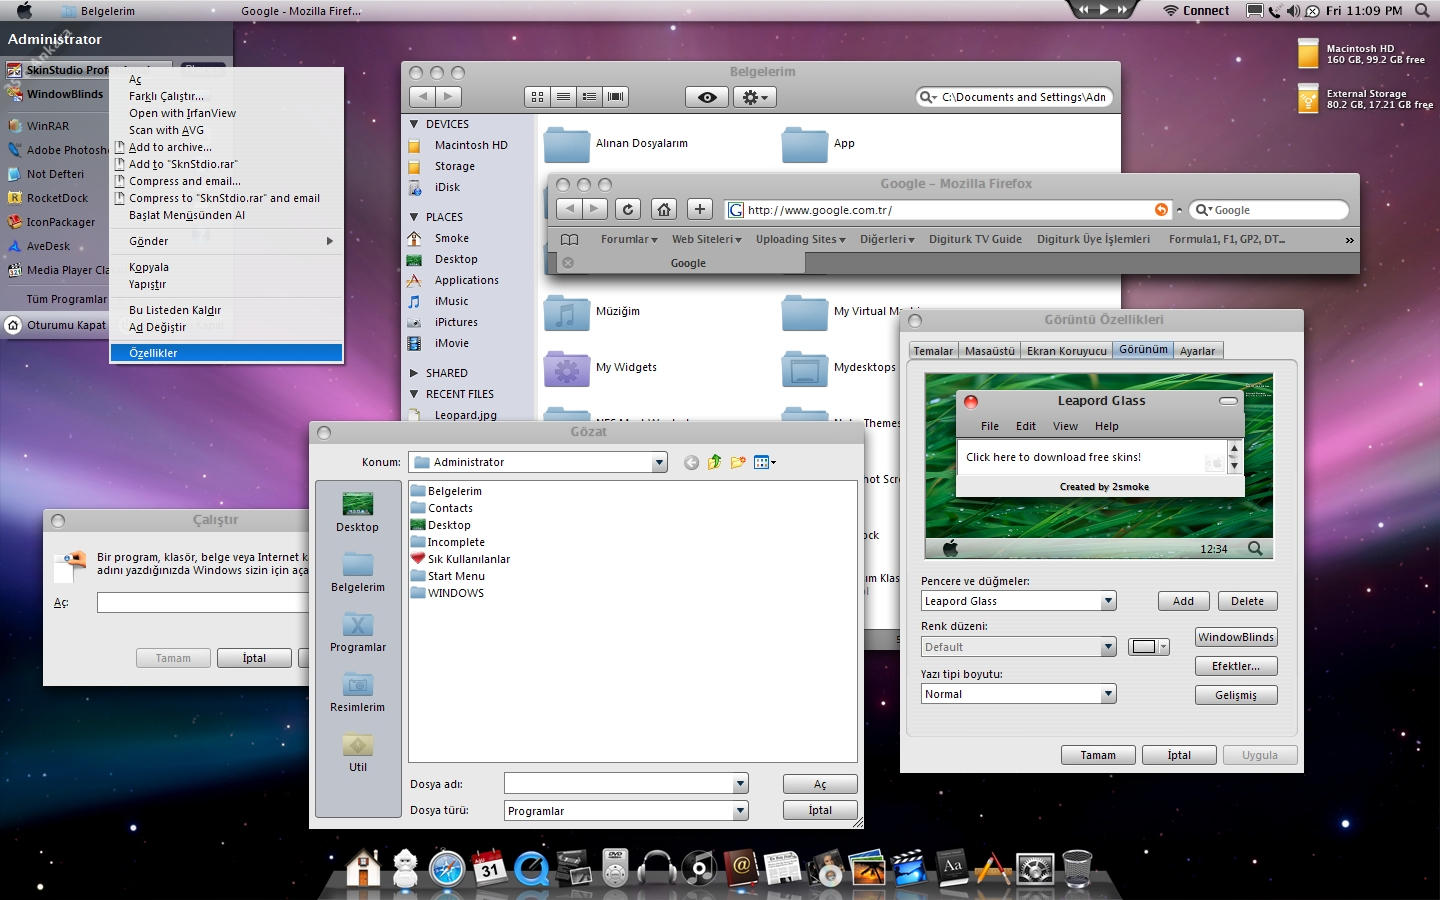 WINDOWBLINDS THEMES - MAC OS X PANTHER BY LUDAMAN418 - CUSTOMIZE.ORG